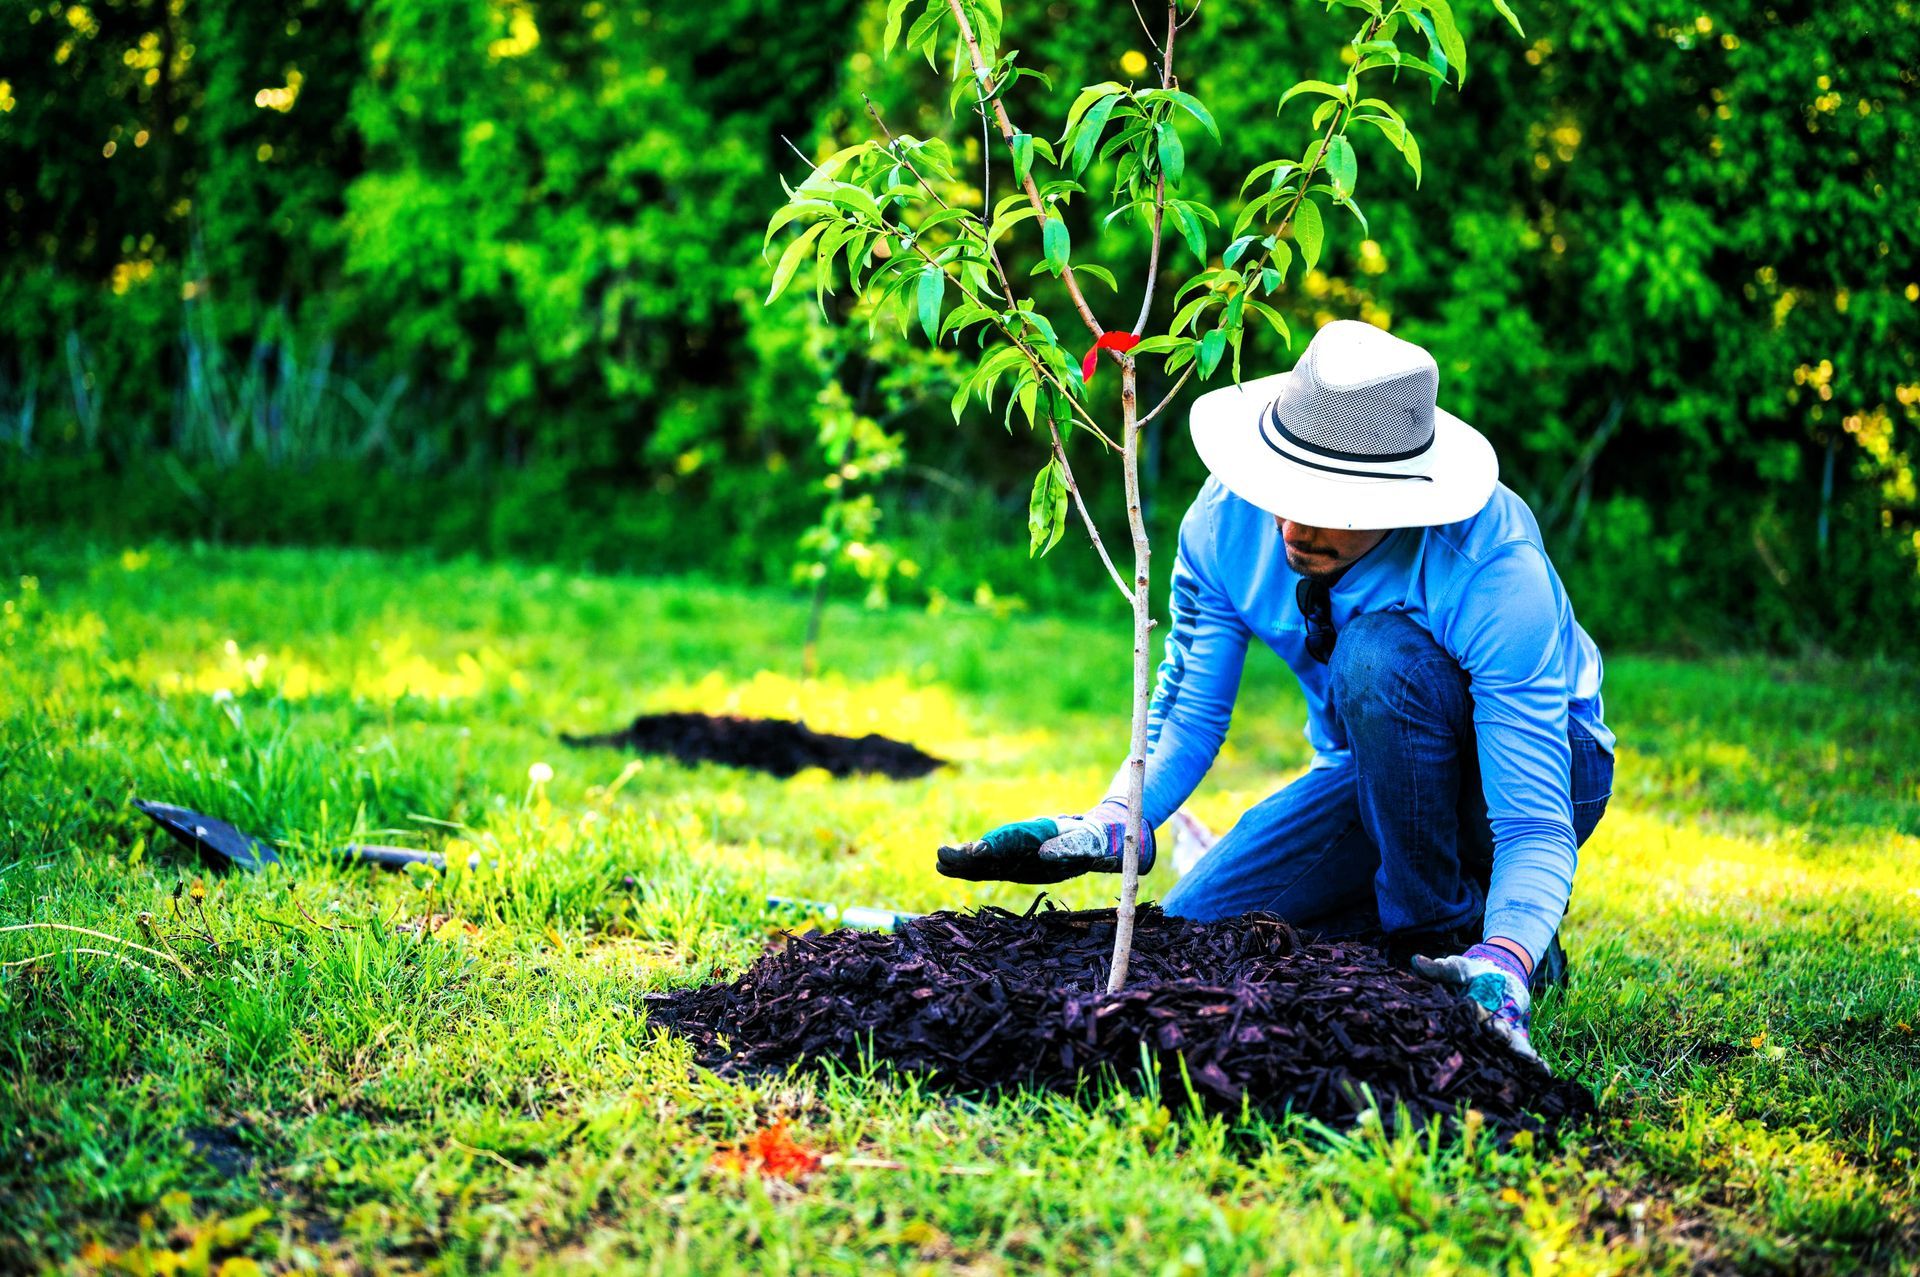 Man in blue shirt planting and fertilizing a tree.